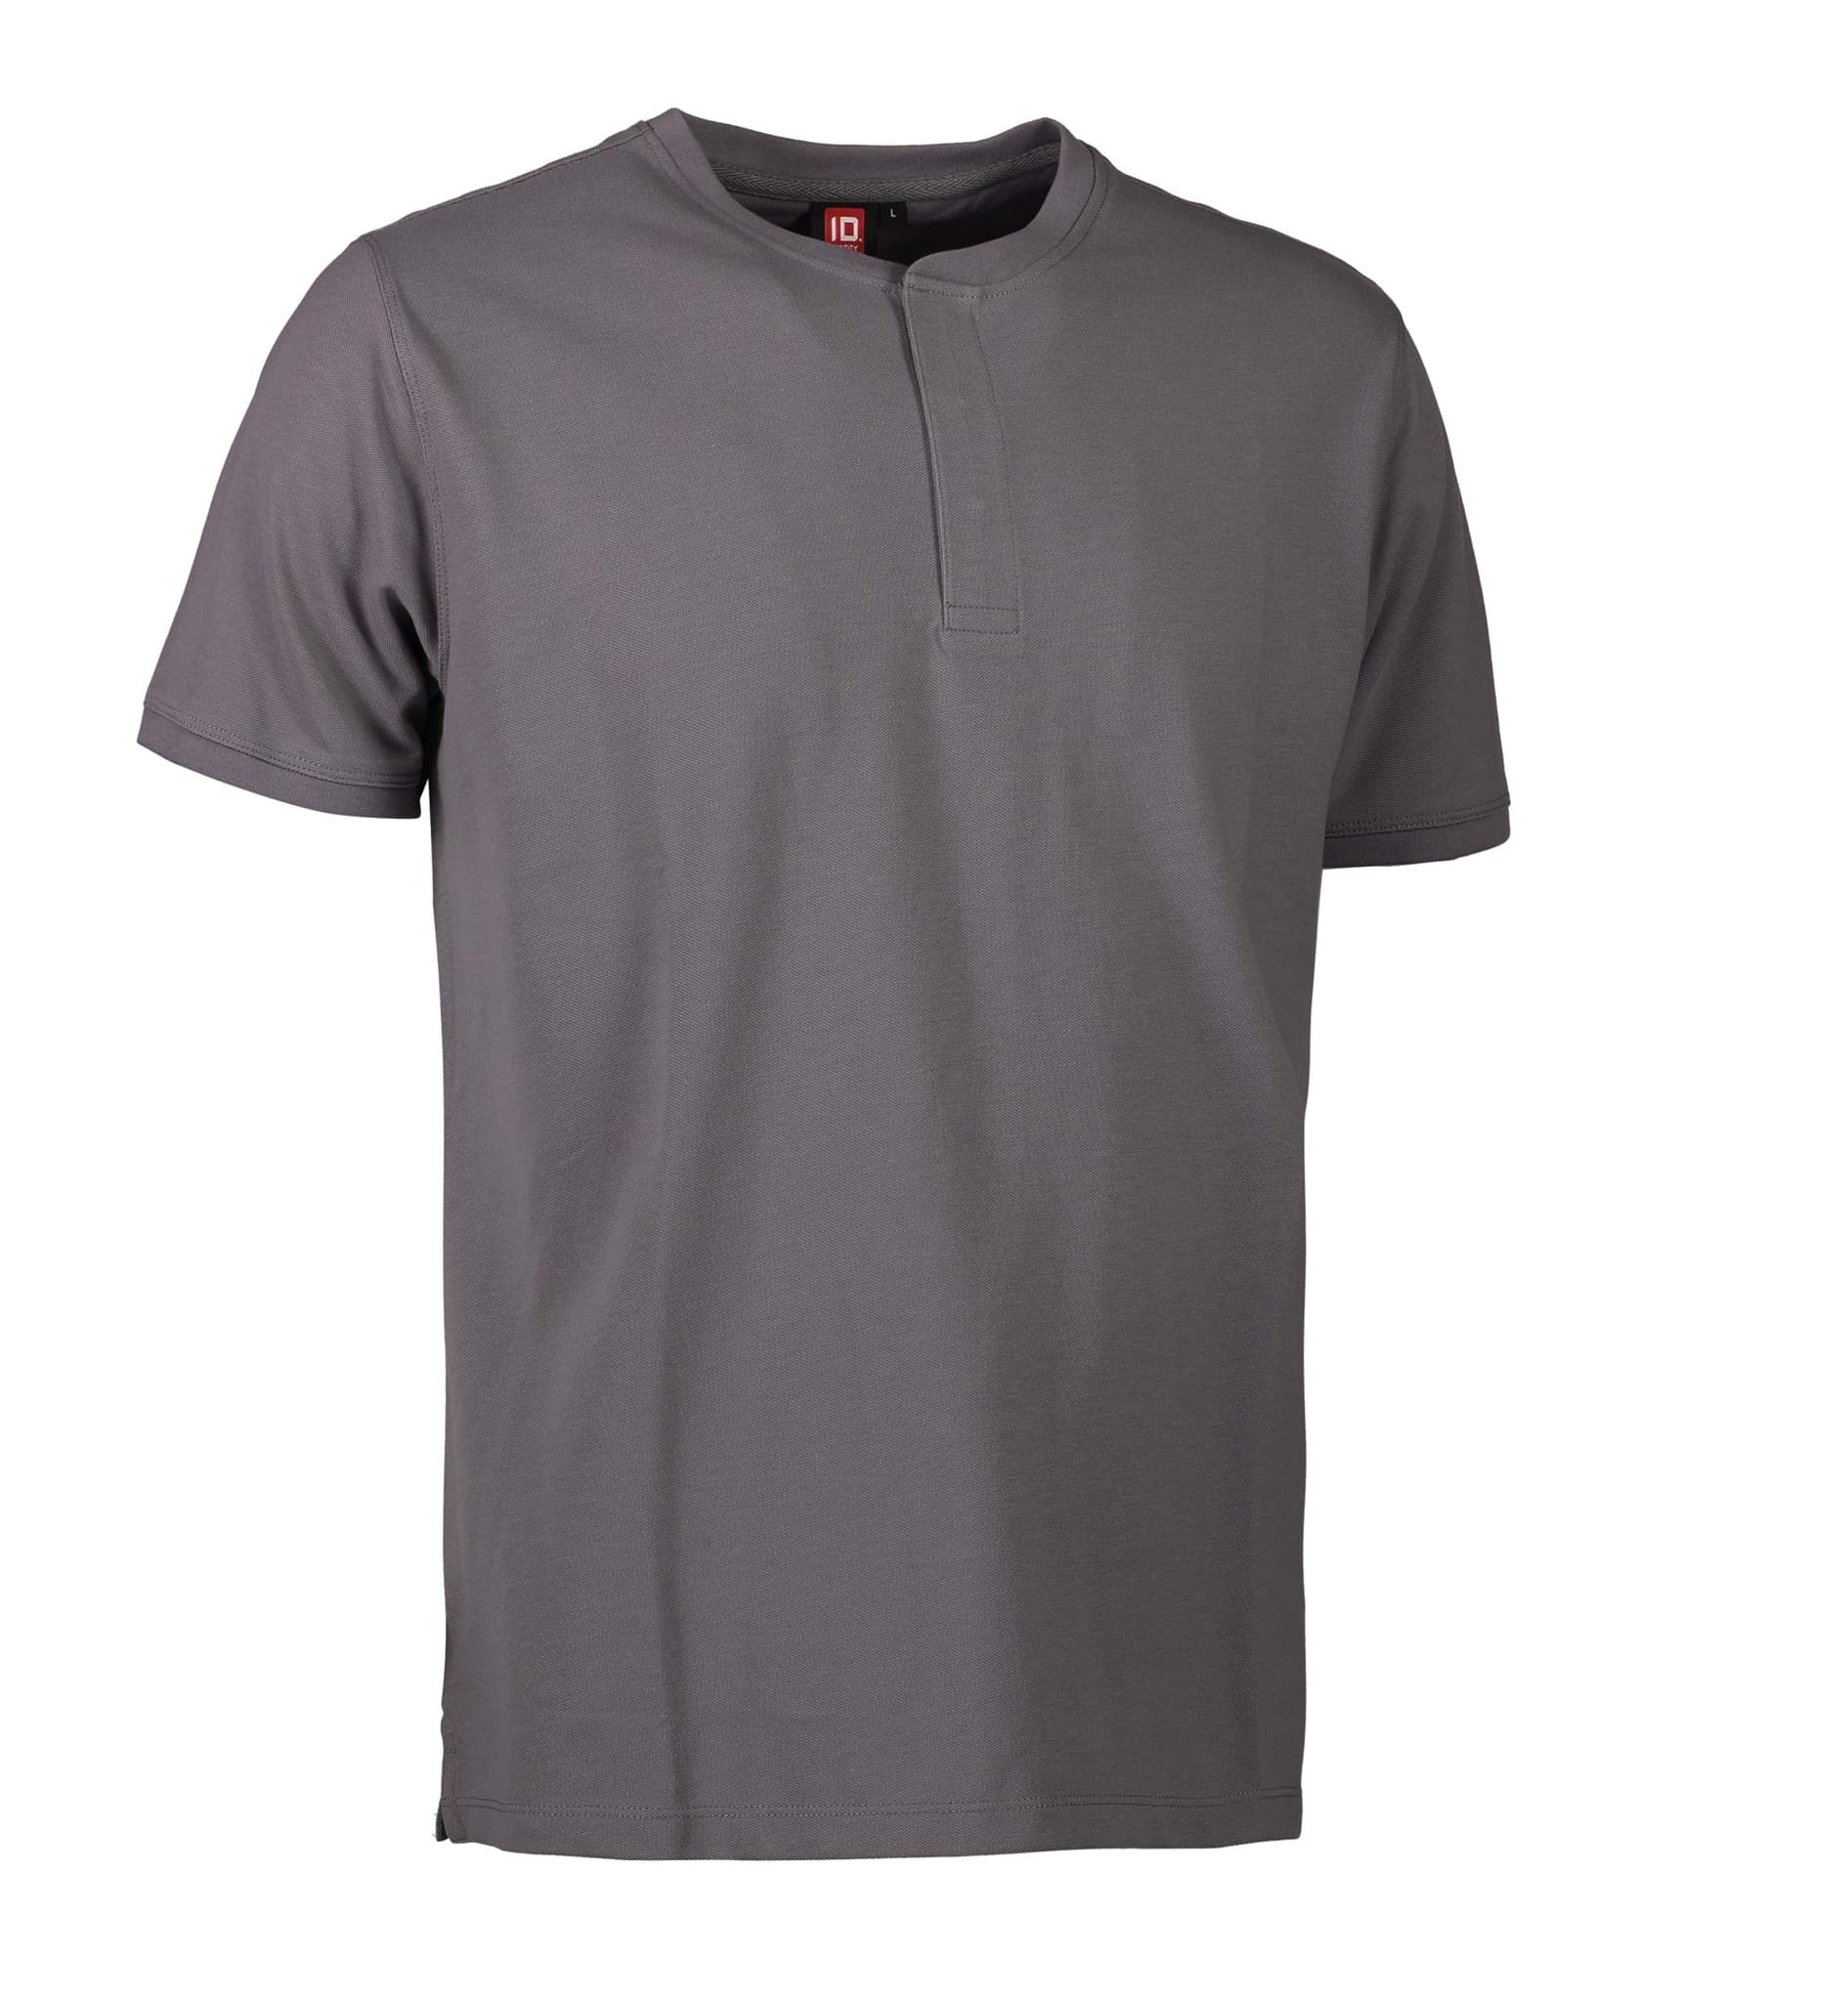 Picture of Pro Wear CARE polo shirt